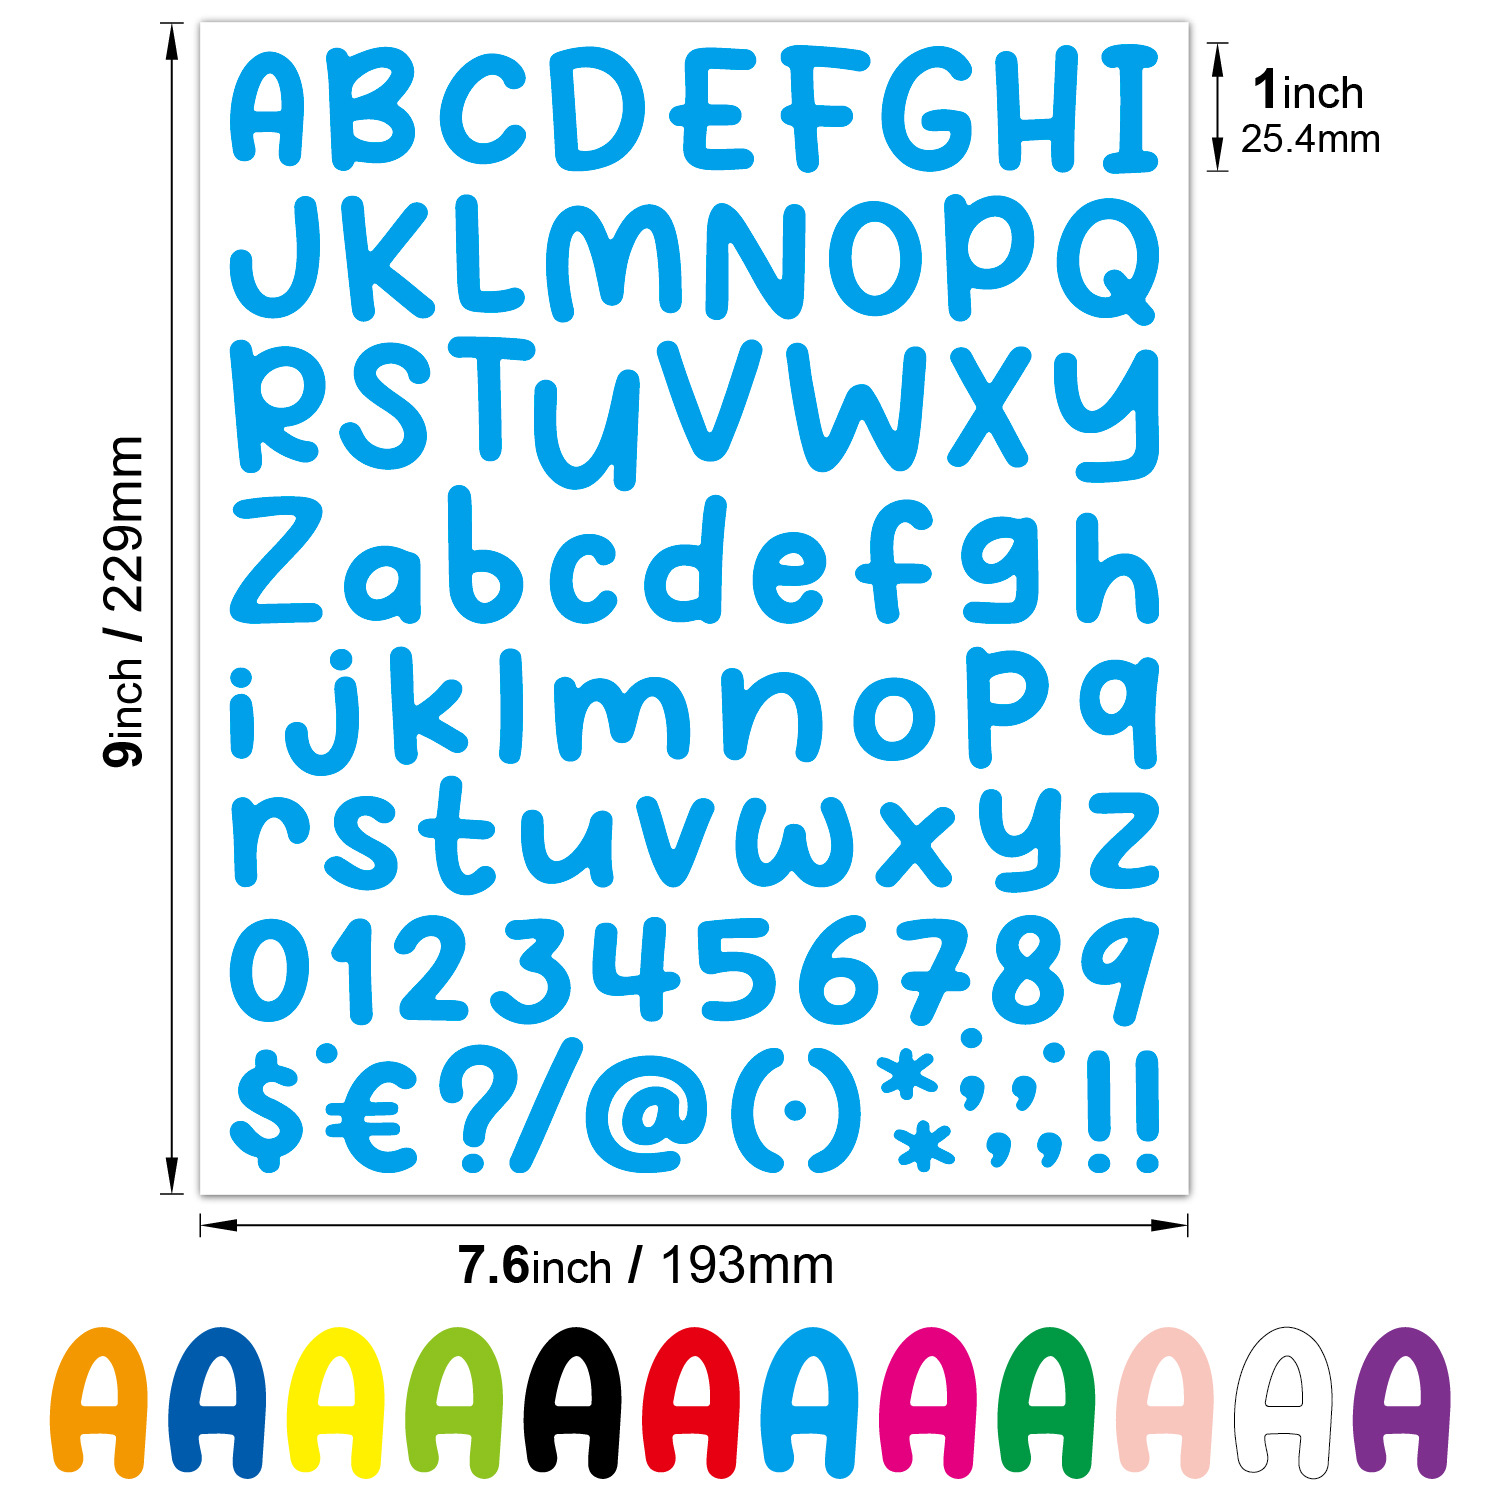 12 Sheets Letter Stickers, 2.5'' Self Adhesive Vinyl Letters